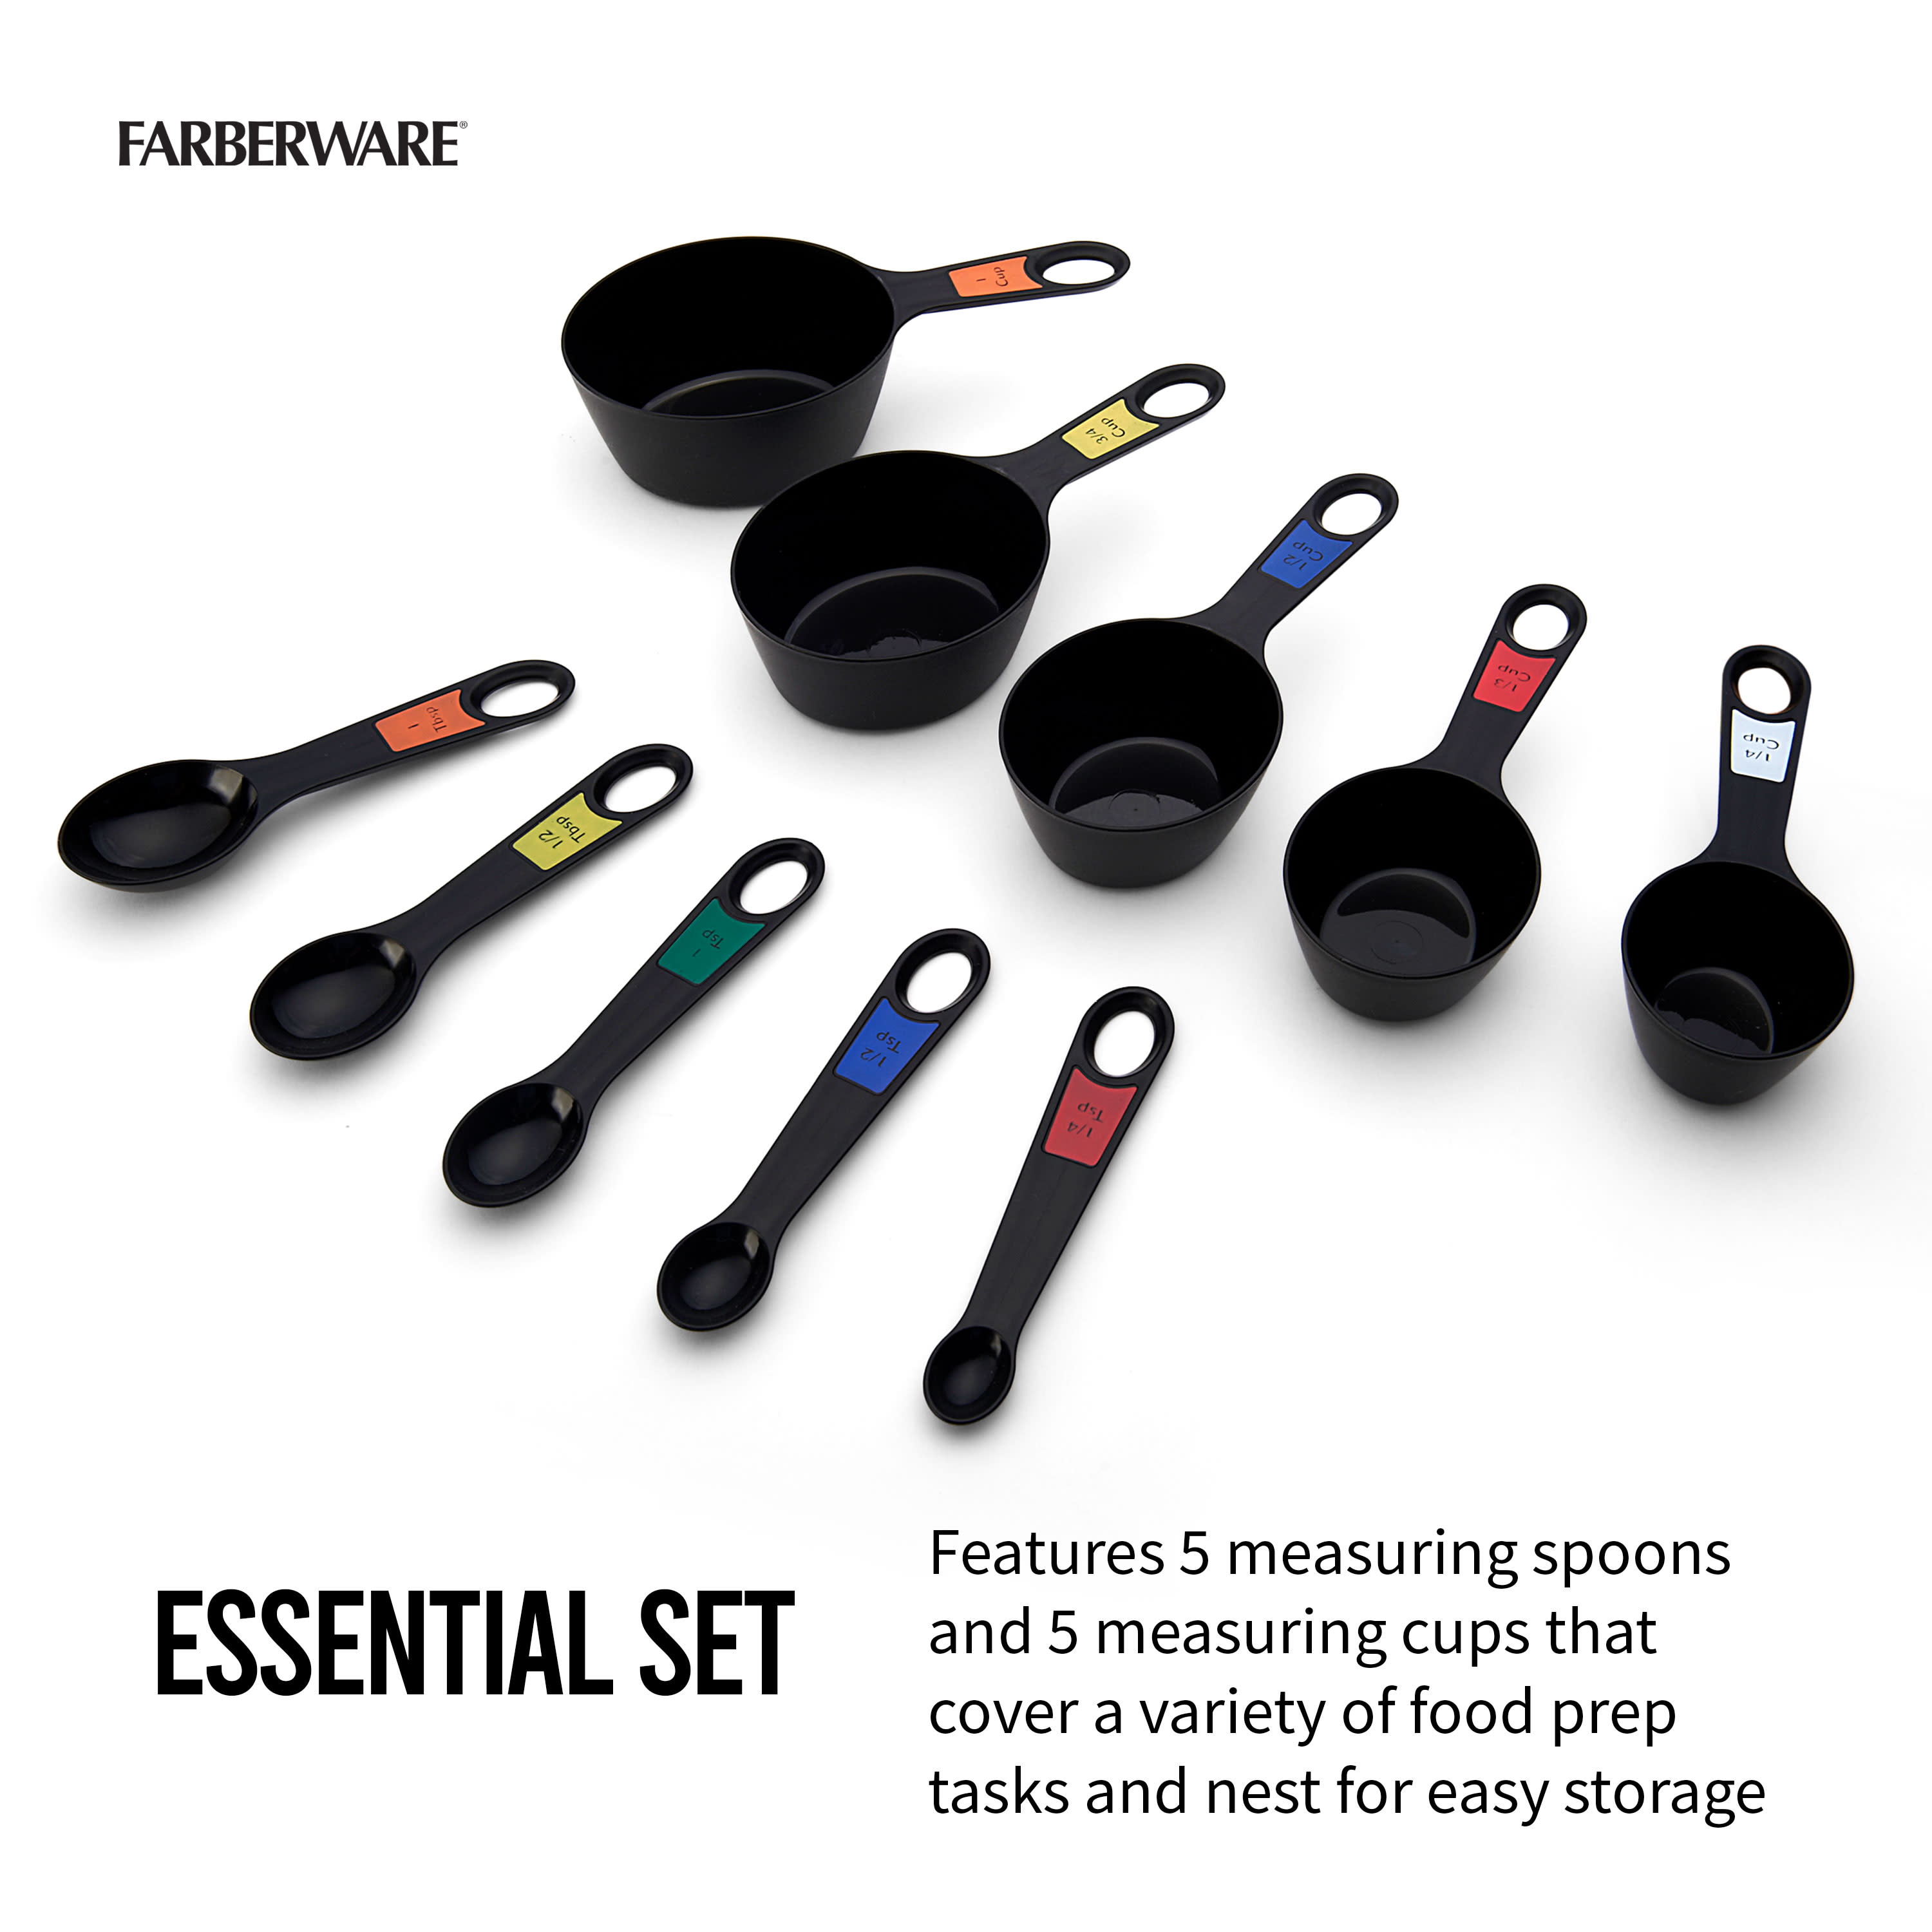 Farberware Professional 10 Piece Plastic Measuring Cup and Spoon Set Black - image 4 of 12